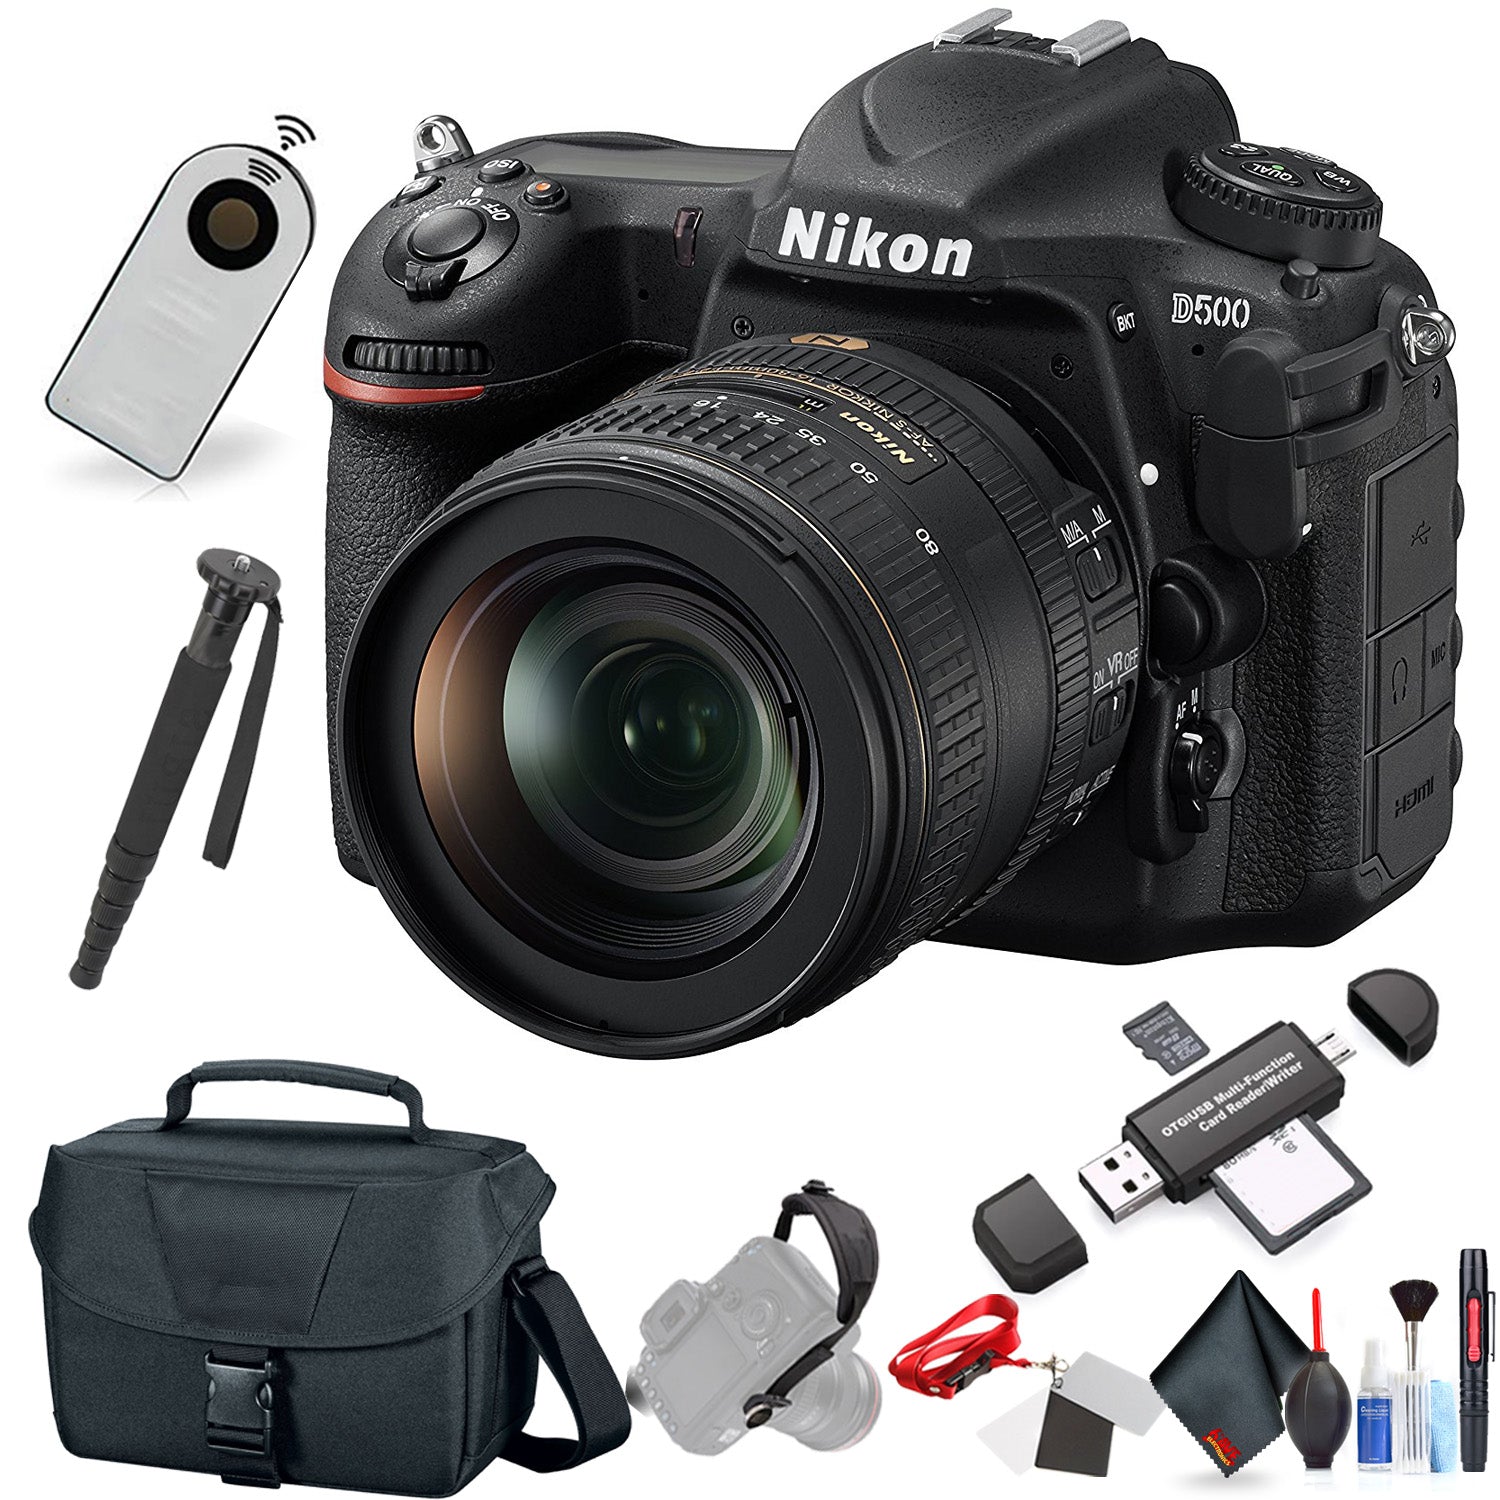 Nikon D500 DSLR Camera with 16-80mm Lens (International Model) with Extra Accessory Bundle